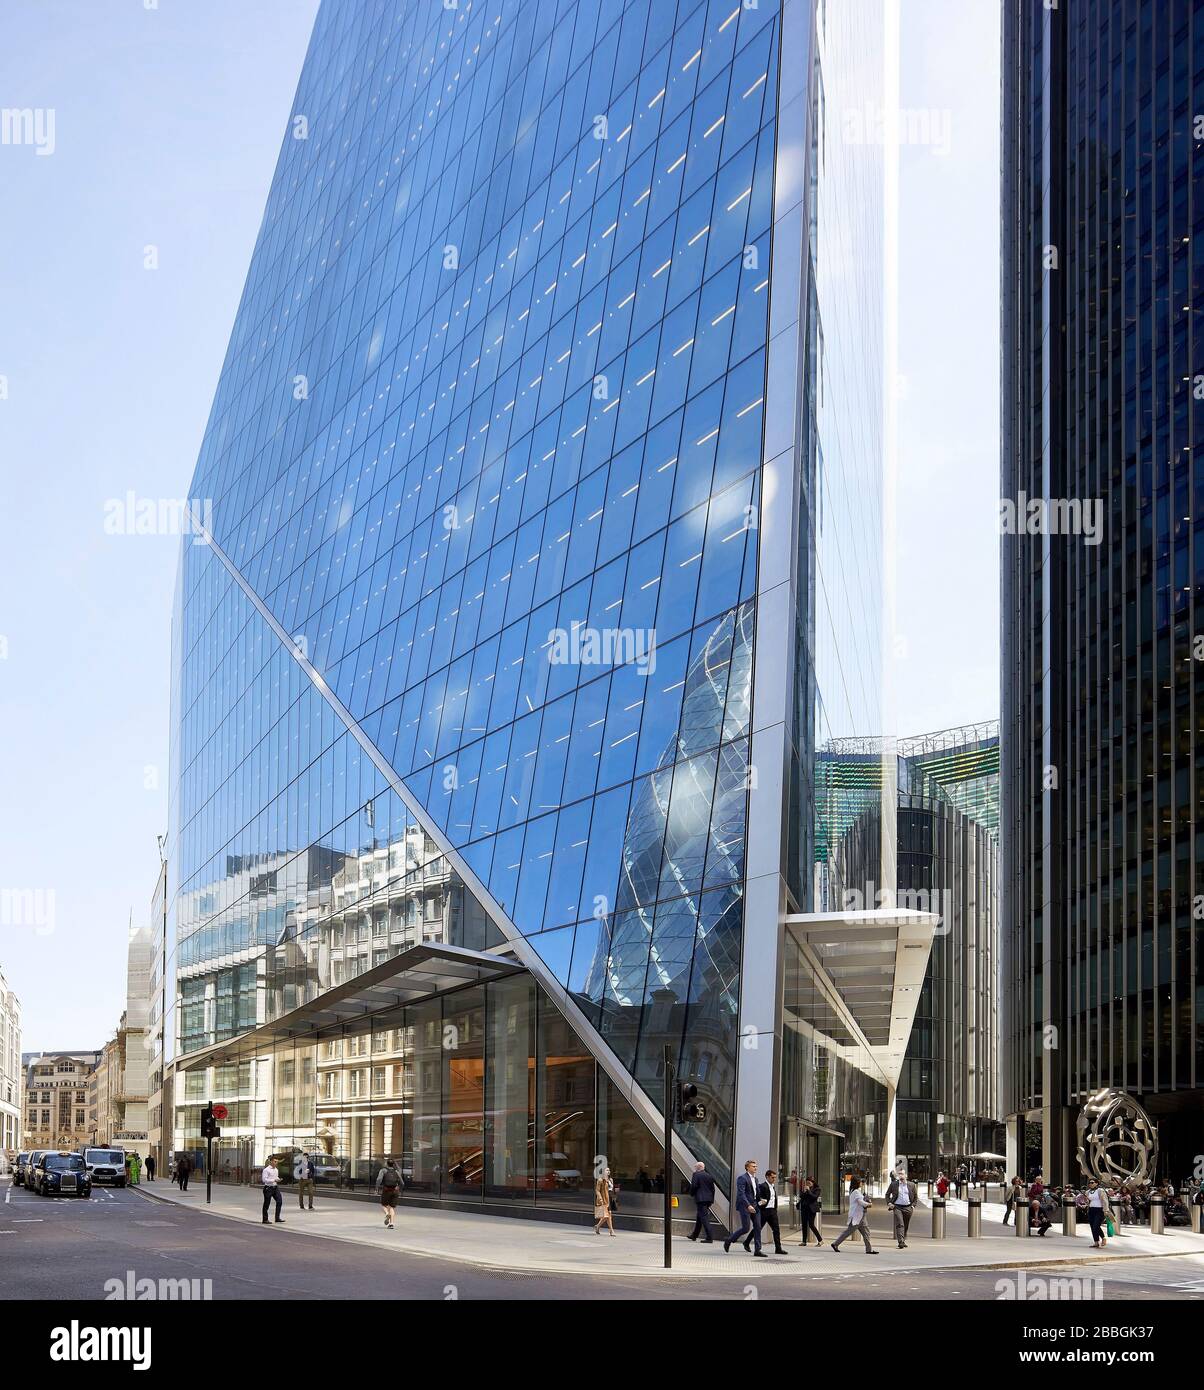 Corner view of reflective facade at Lime and Leadenhall Streets. 52 Lime Street - The Scalpel, London, United Kingdom. Architect: Kohn Pedersen Fox As Stock Photo